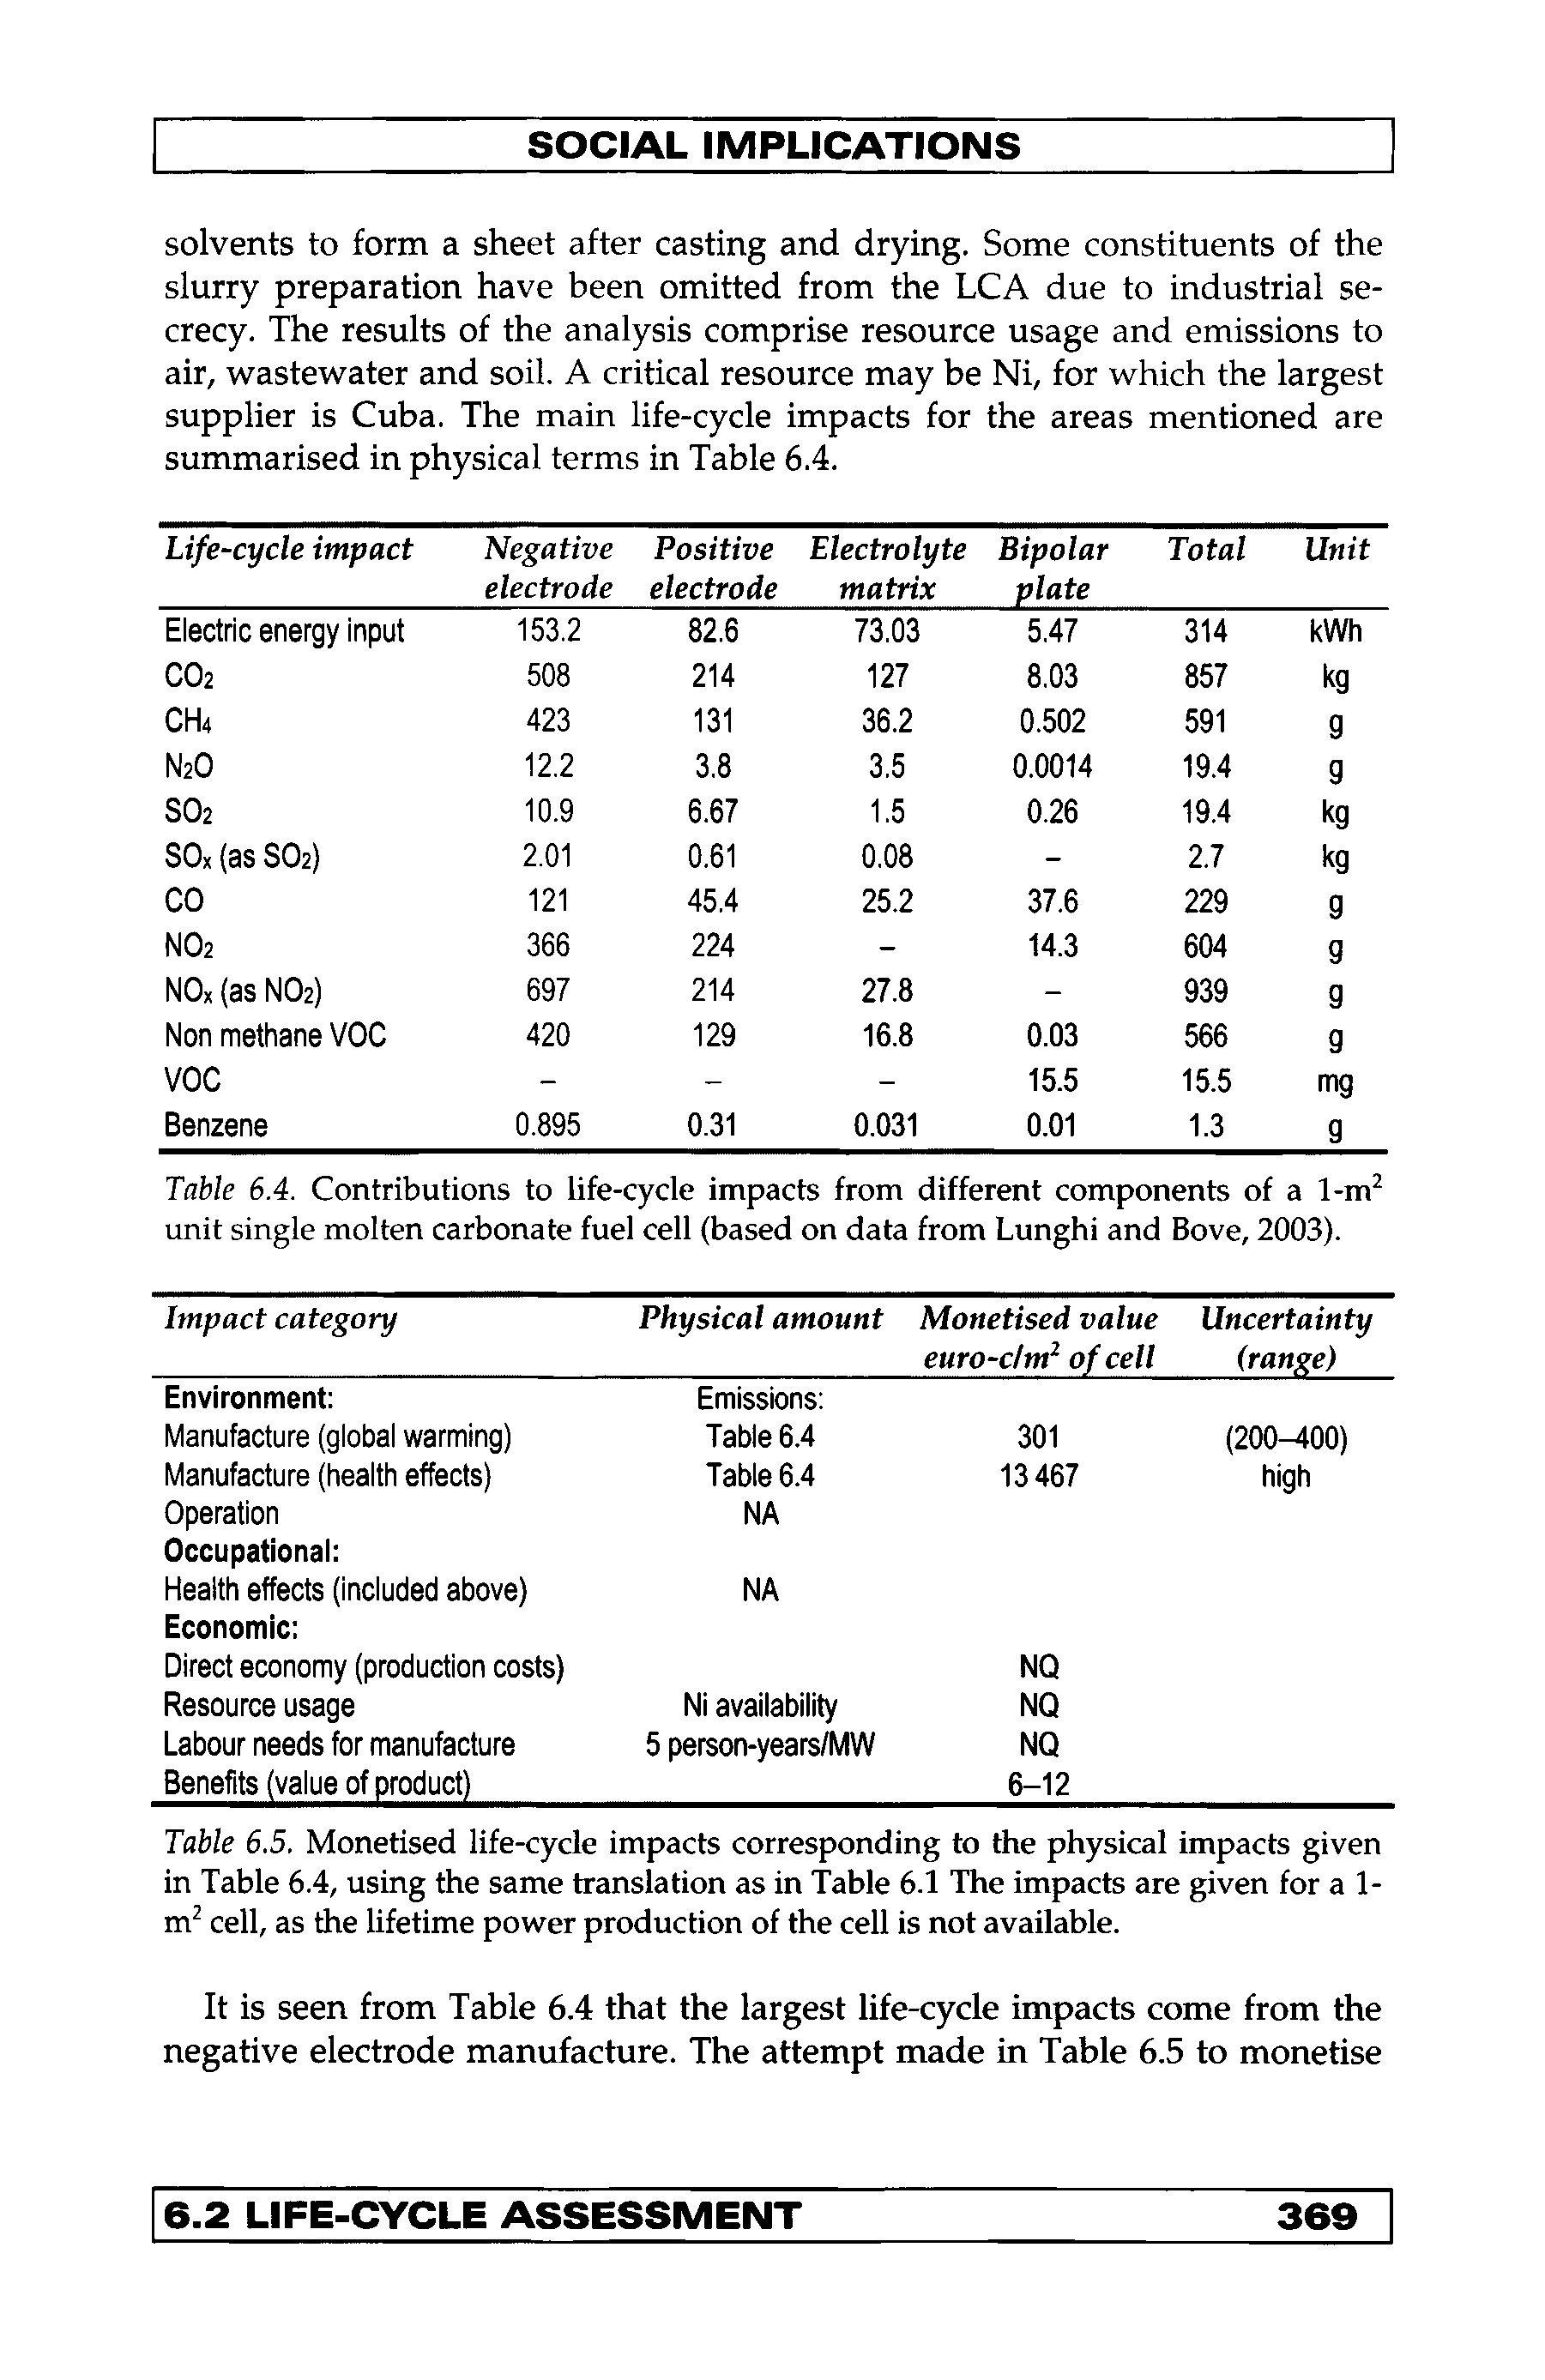 Table 6.4. Contributions to life-cycle impacts from different components of a 1-m unit single molten carbonate fuel cell (based on data from Lunghi and Bove, 2003).